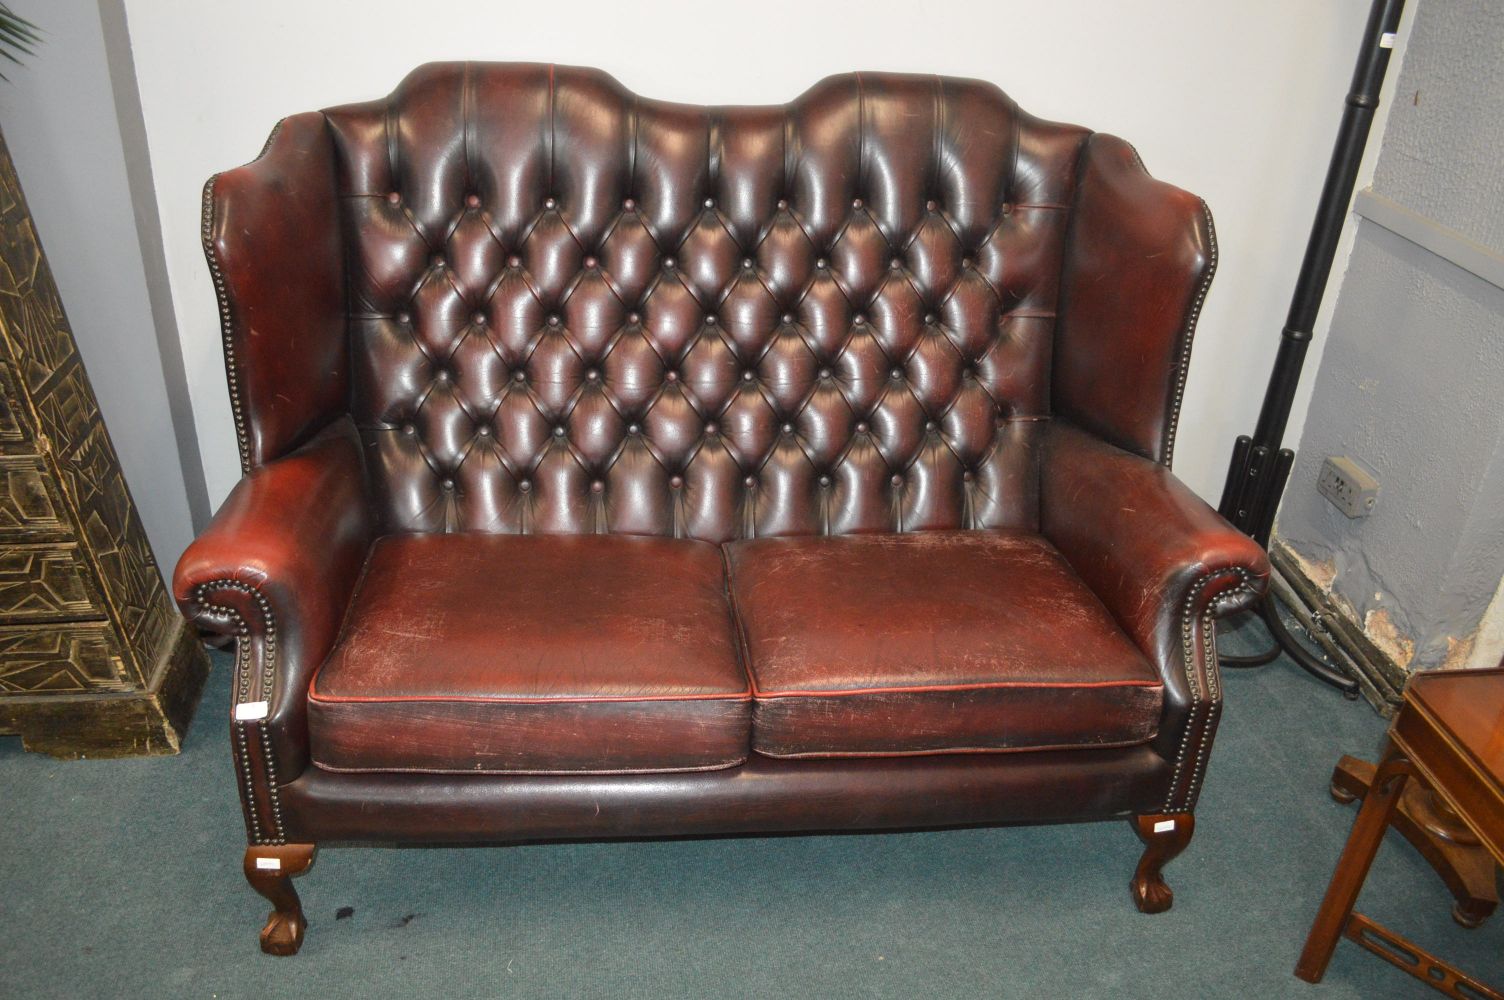 8560 - Antique & Modern Household Furniture and Furnishings, and New & Returned Merchandise